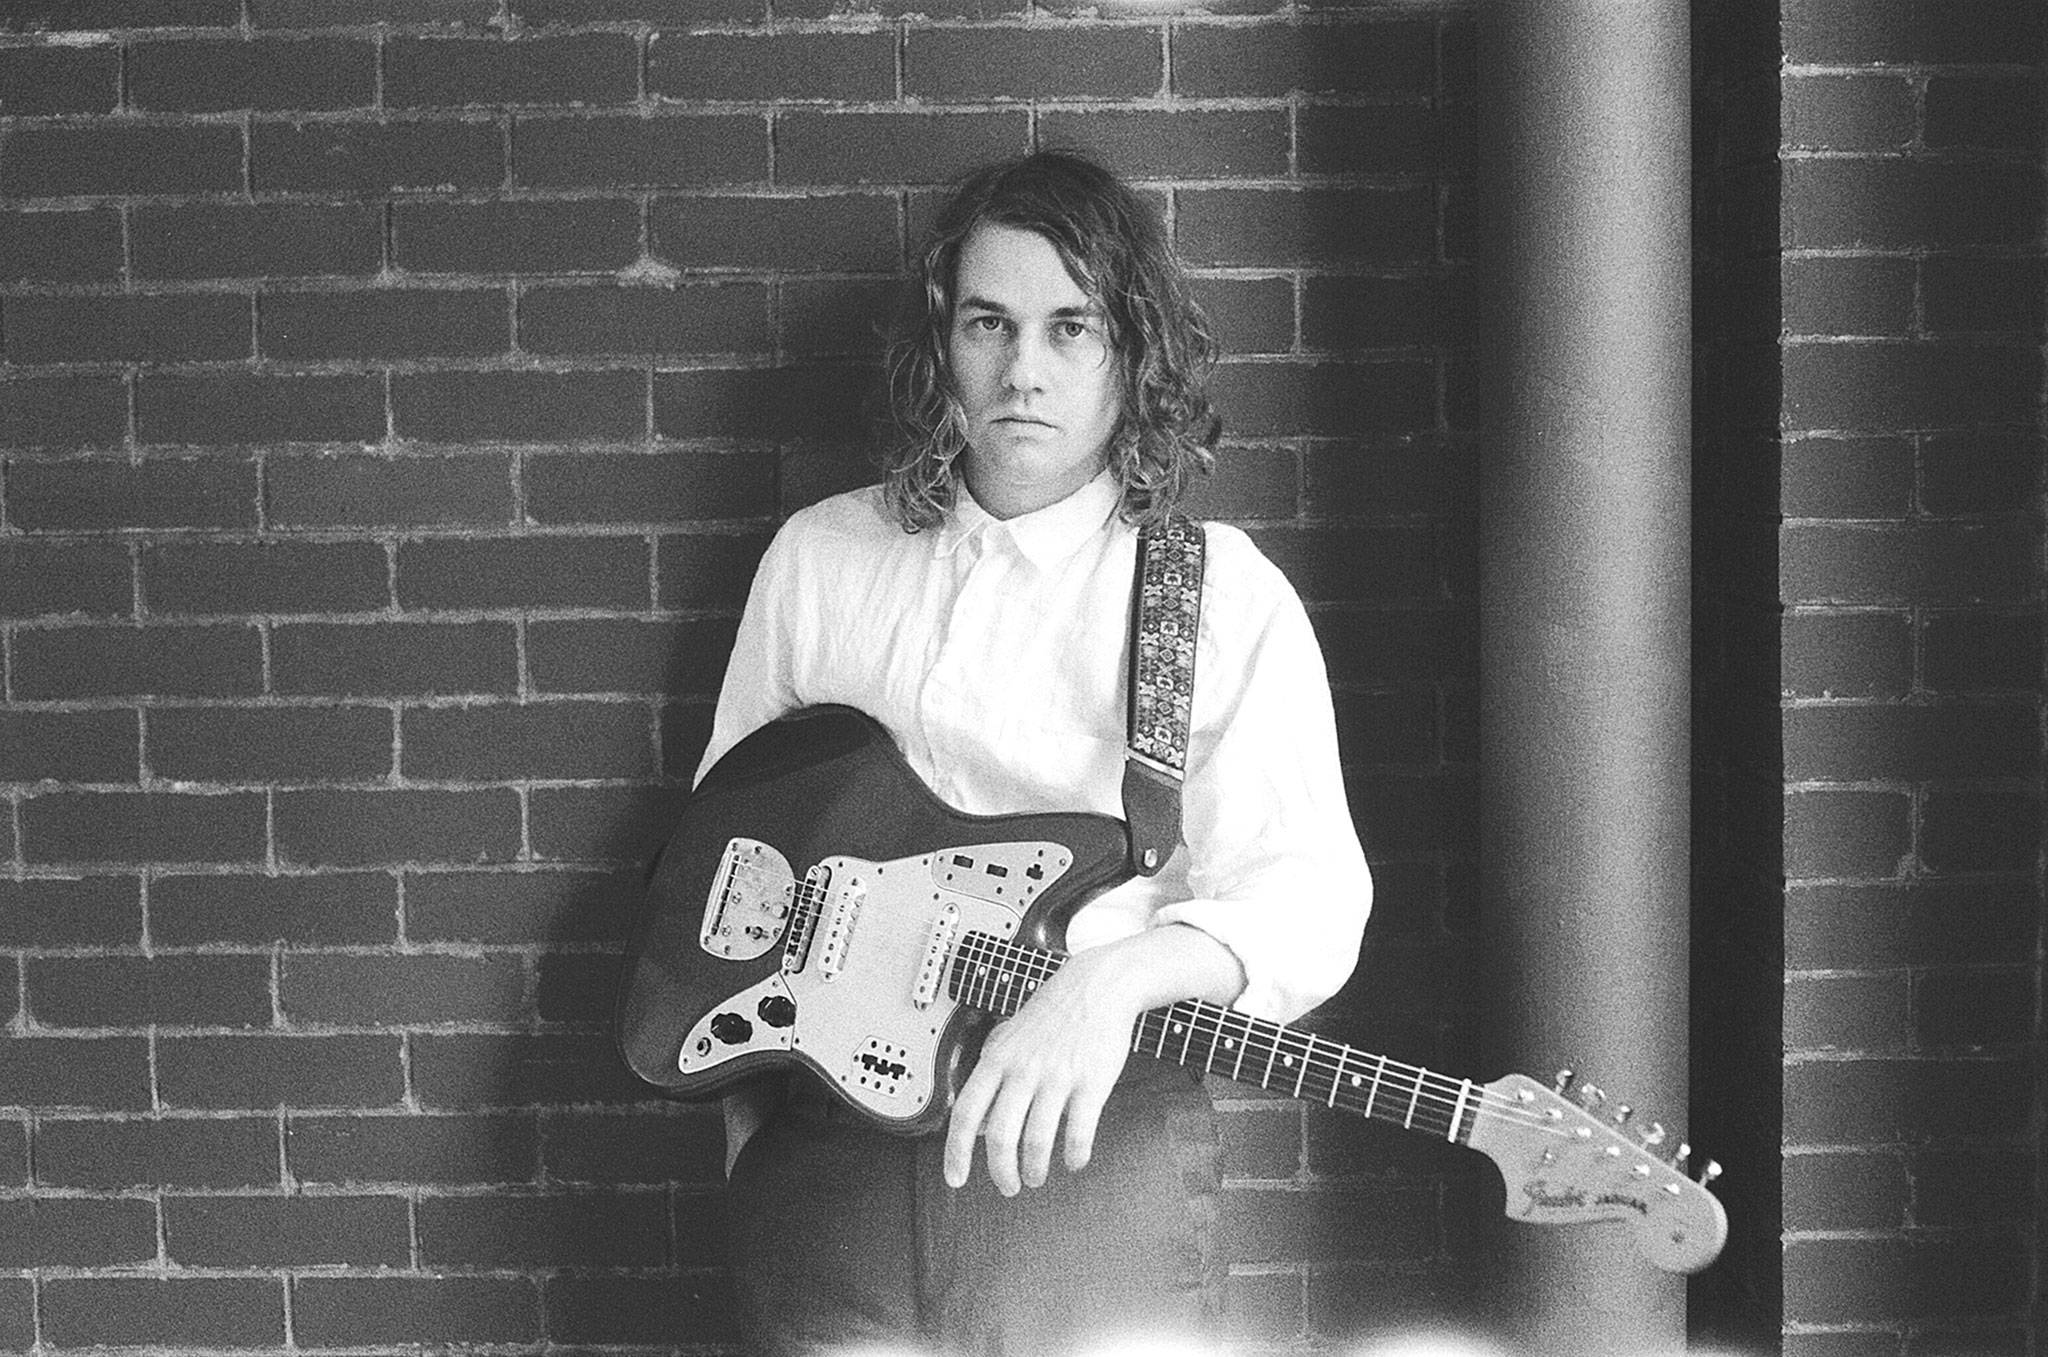 Kevin Morby, an indie rocker from Los Angeles, is the headliner of this year’s Fisherman’s Village Music Festival, which is March 30 through April 1.